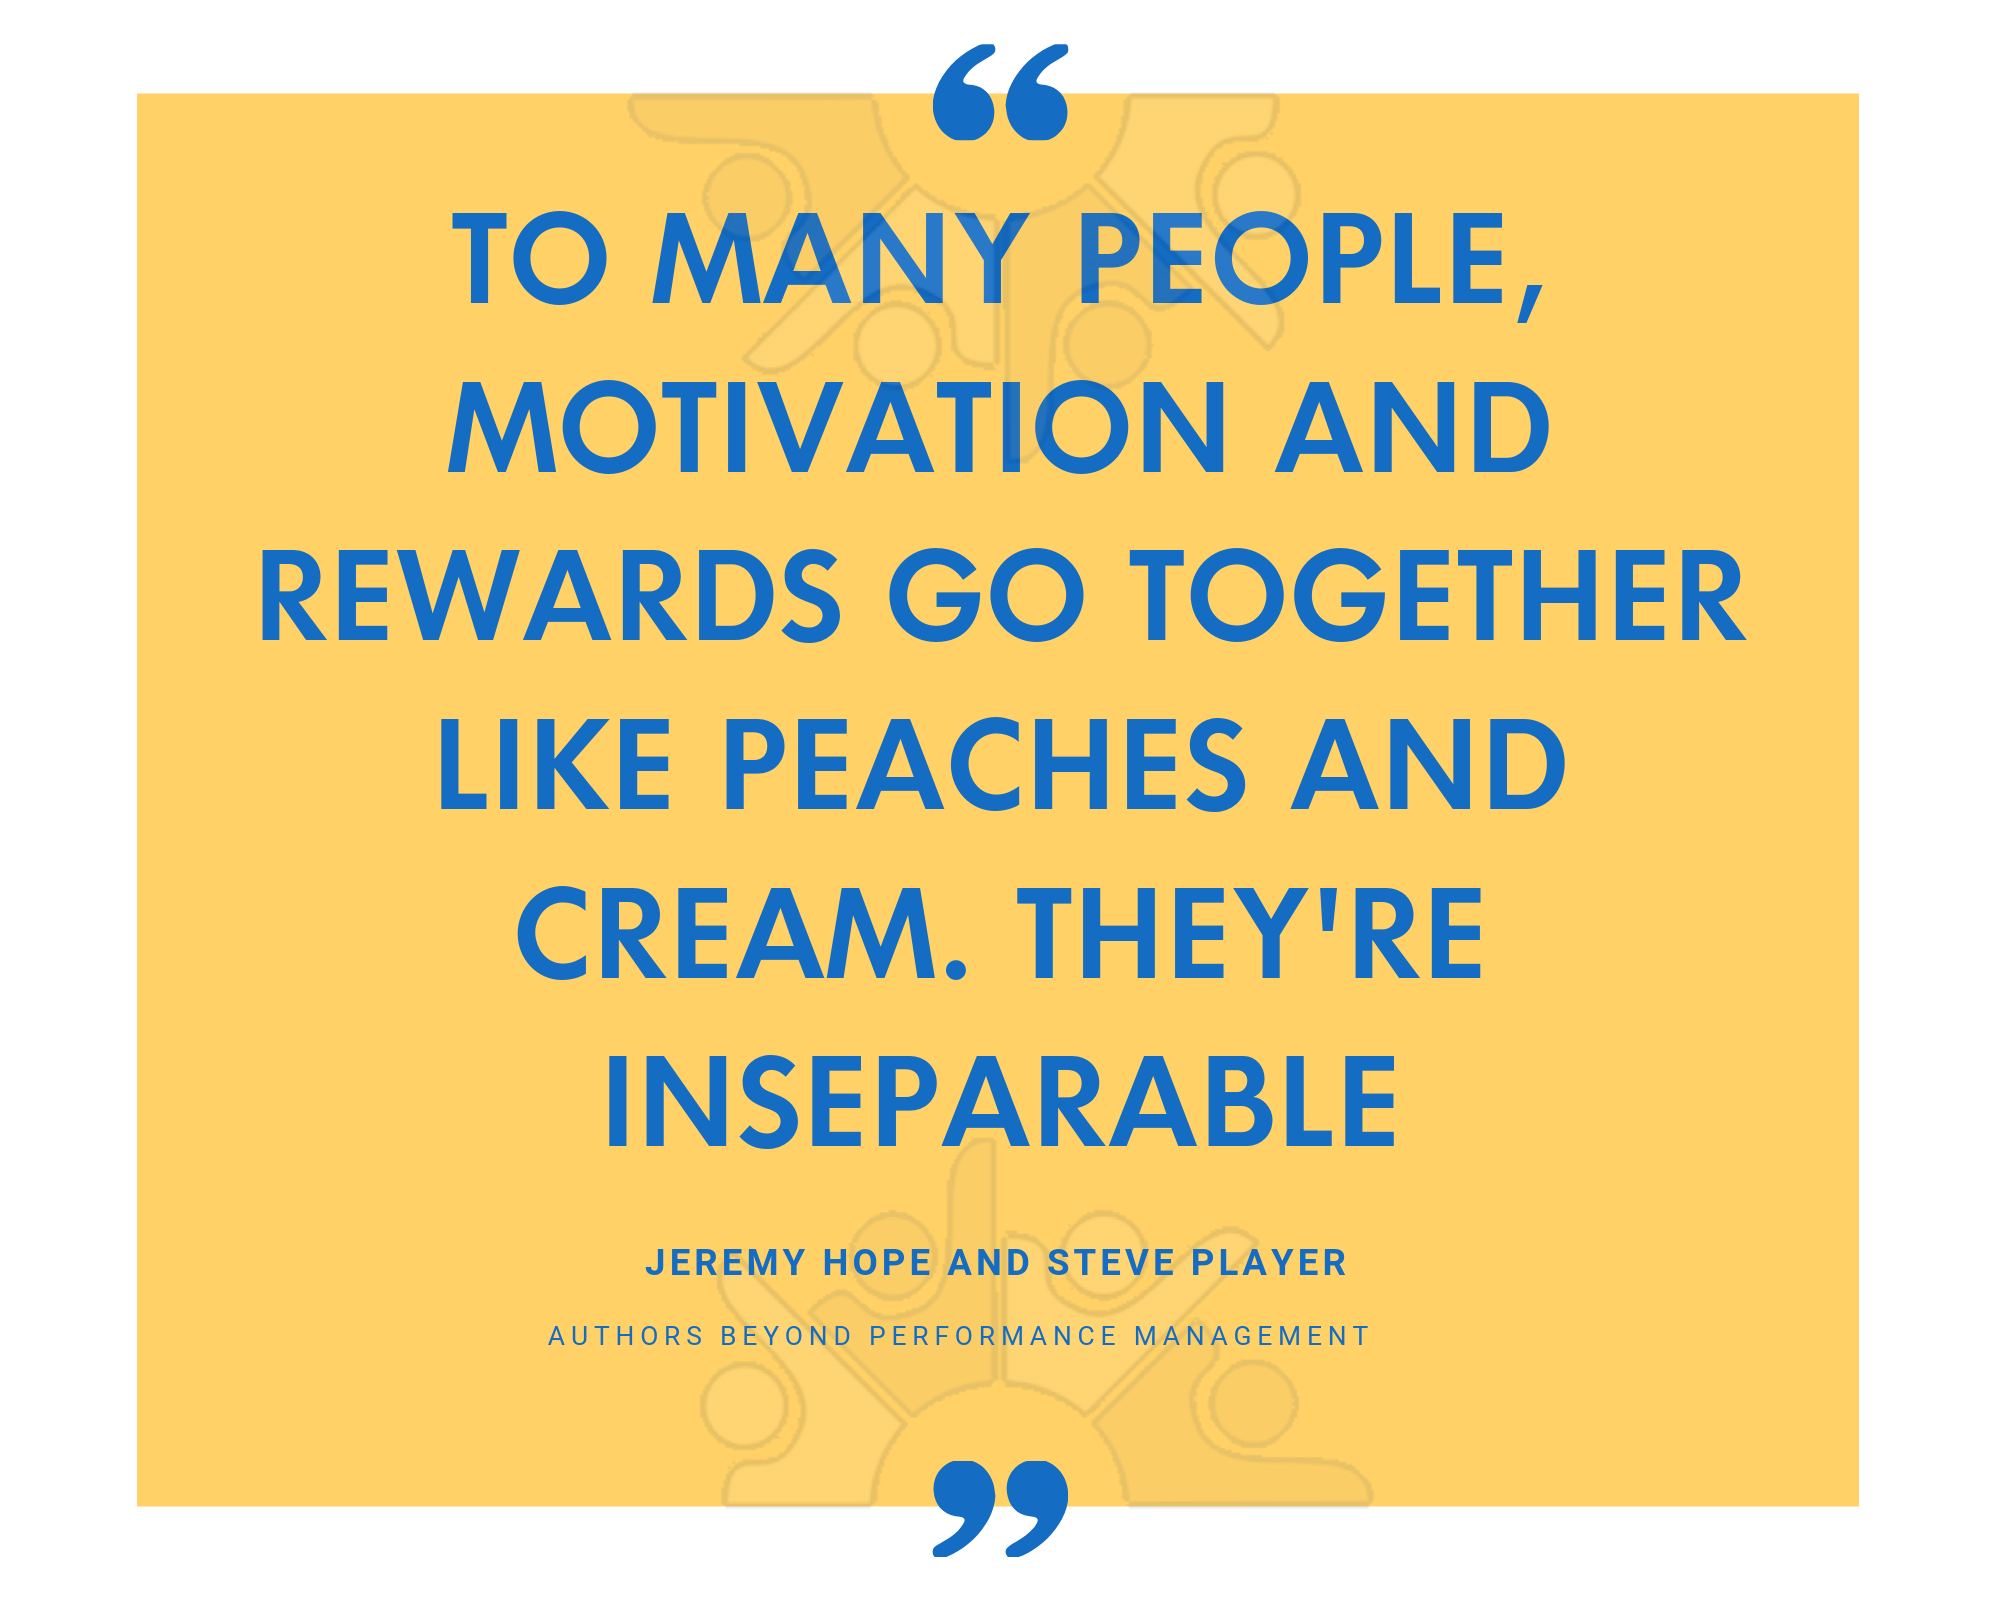 To many people, motivation and rewards go together like peaches and cream. Theyre inseparable